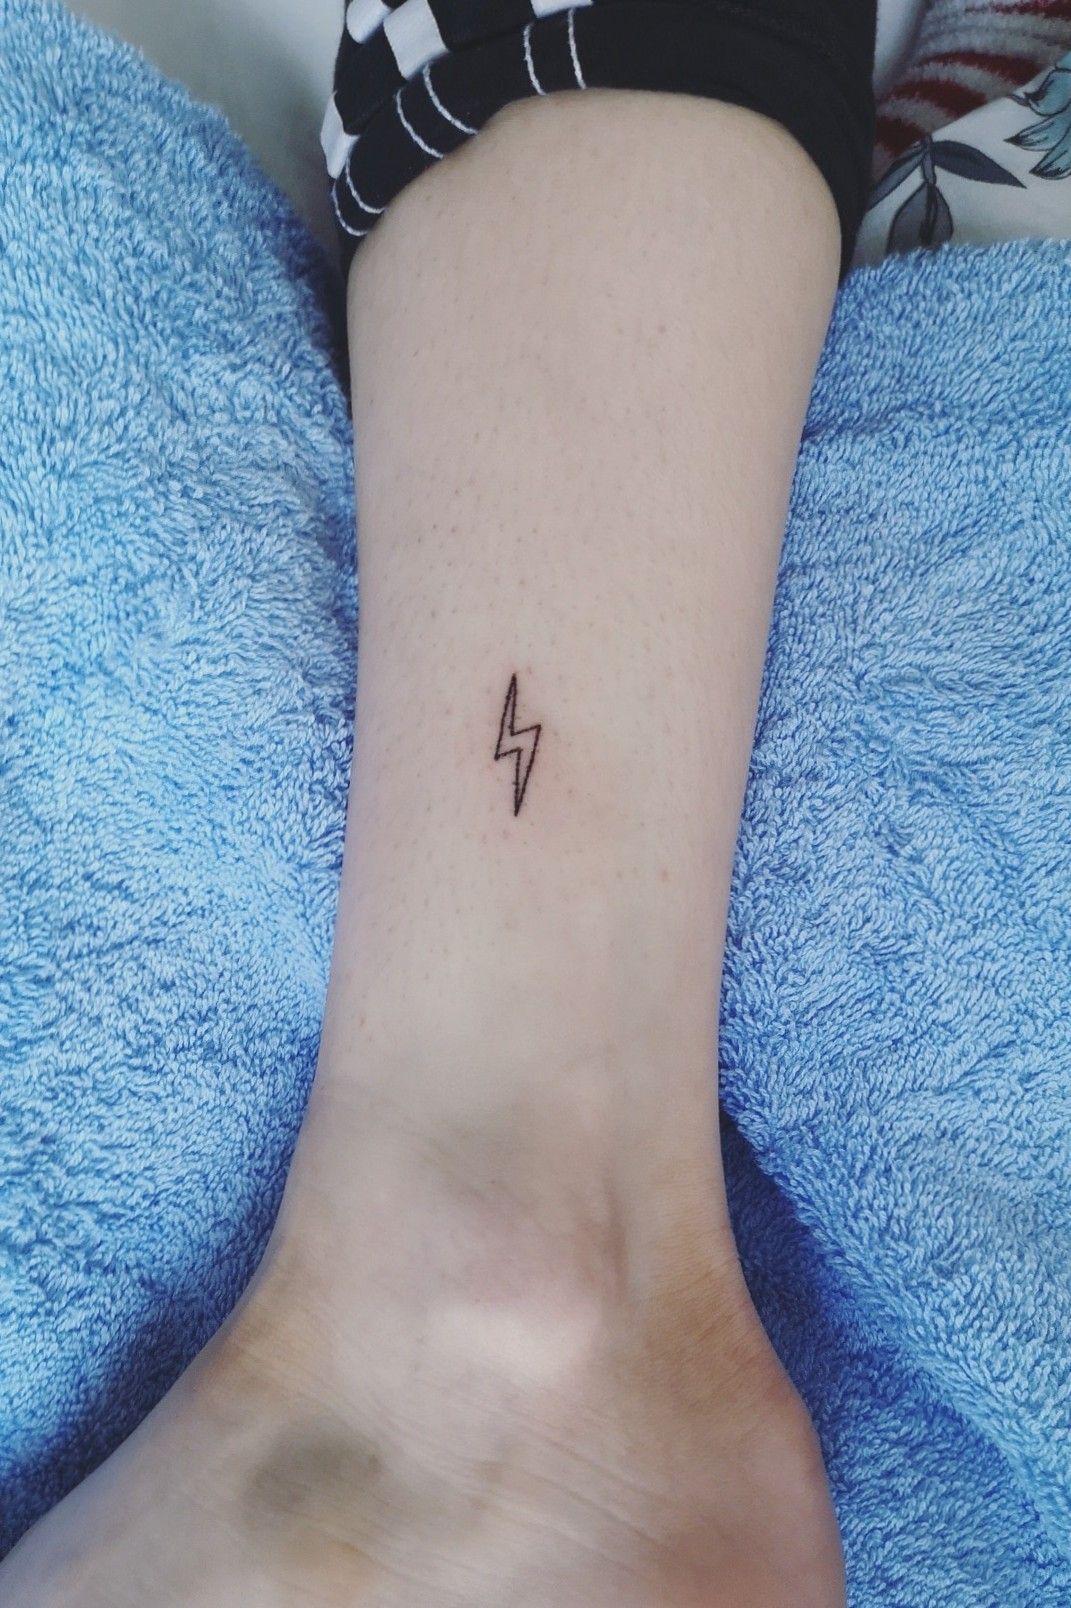 Tiny lightning bolt tattoo on the ankle